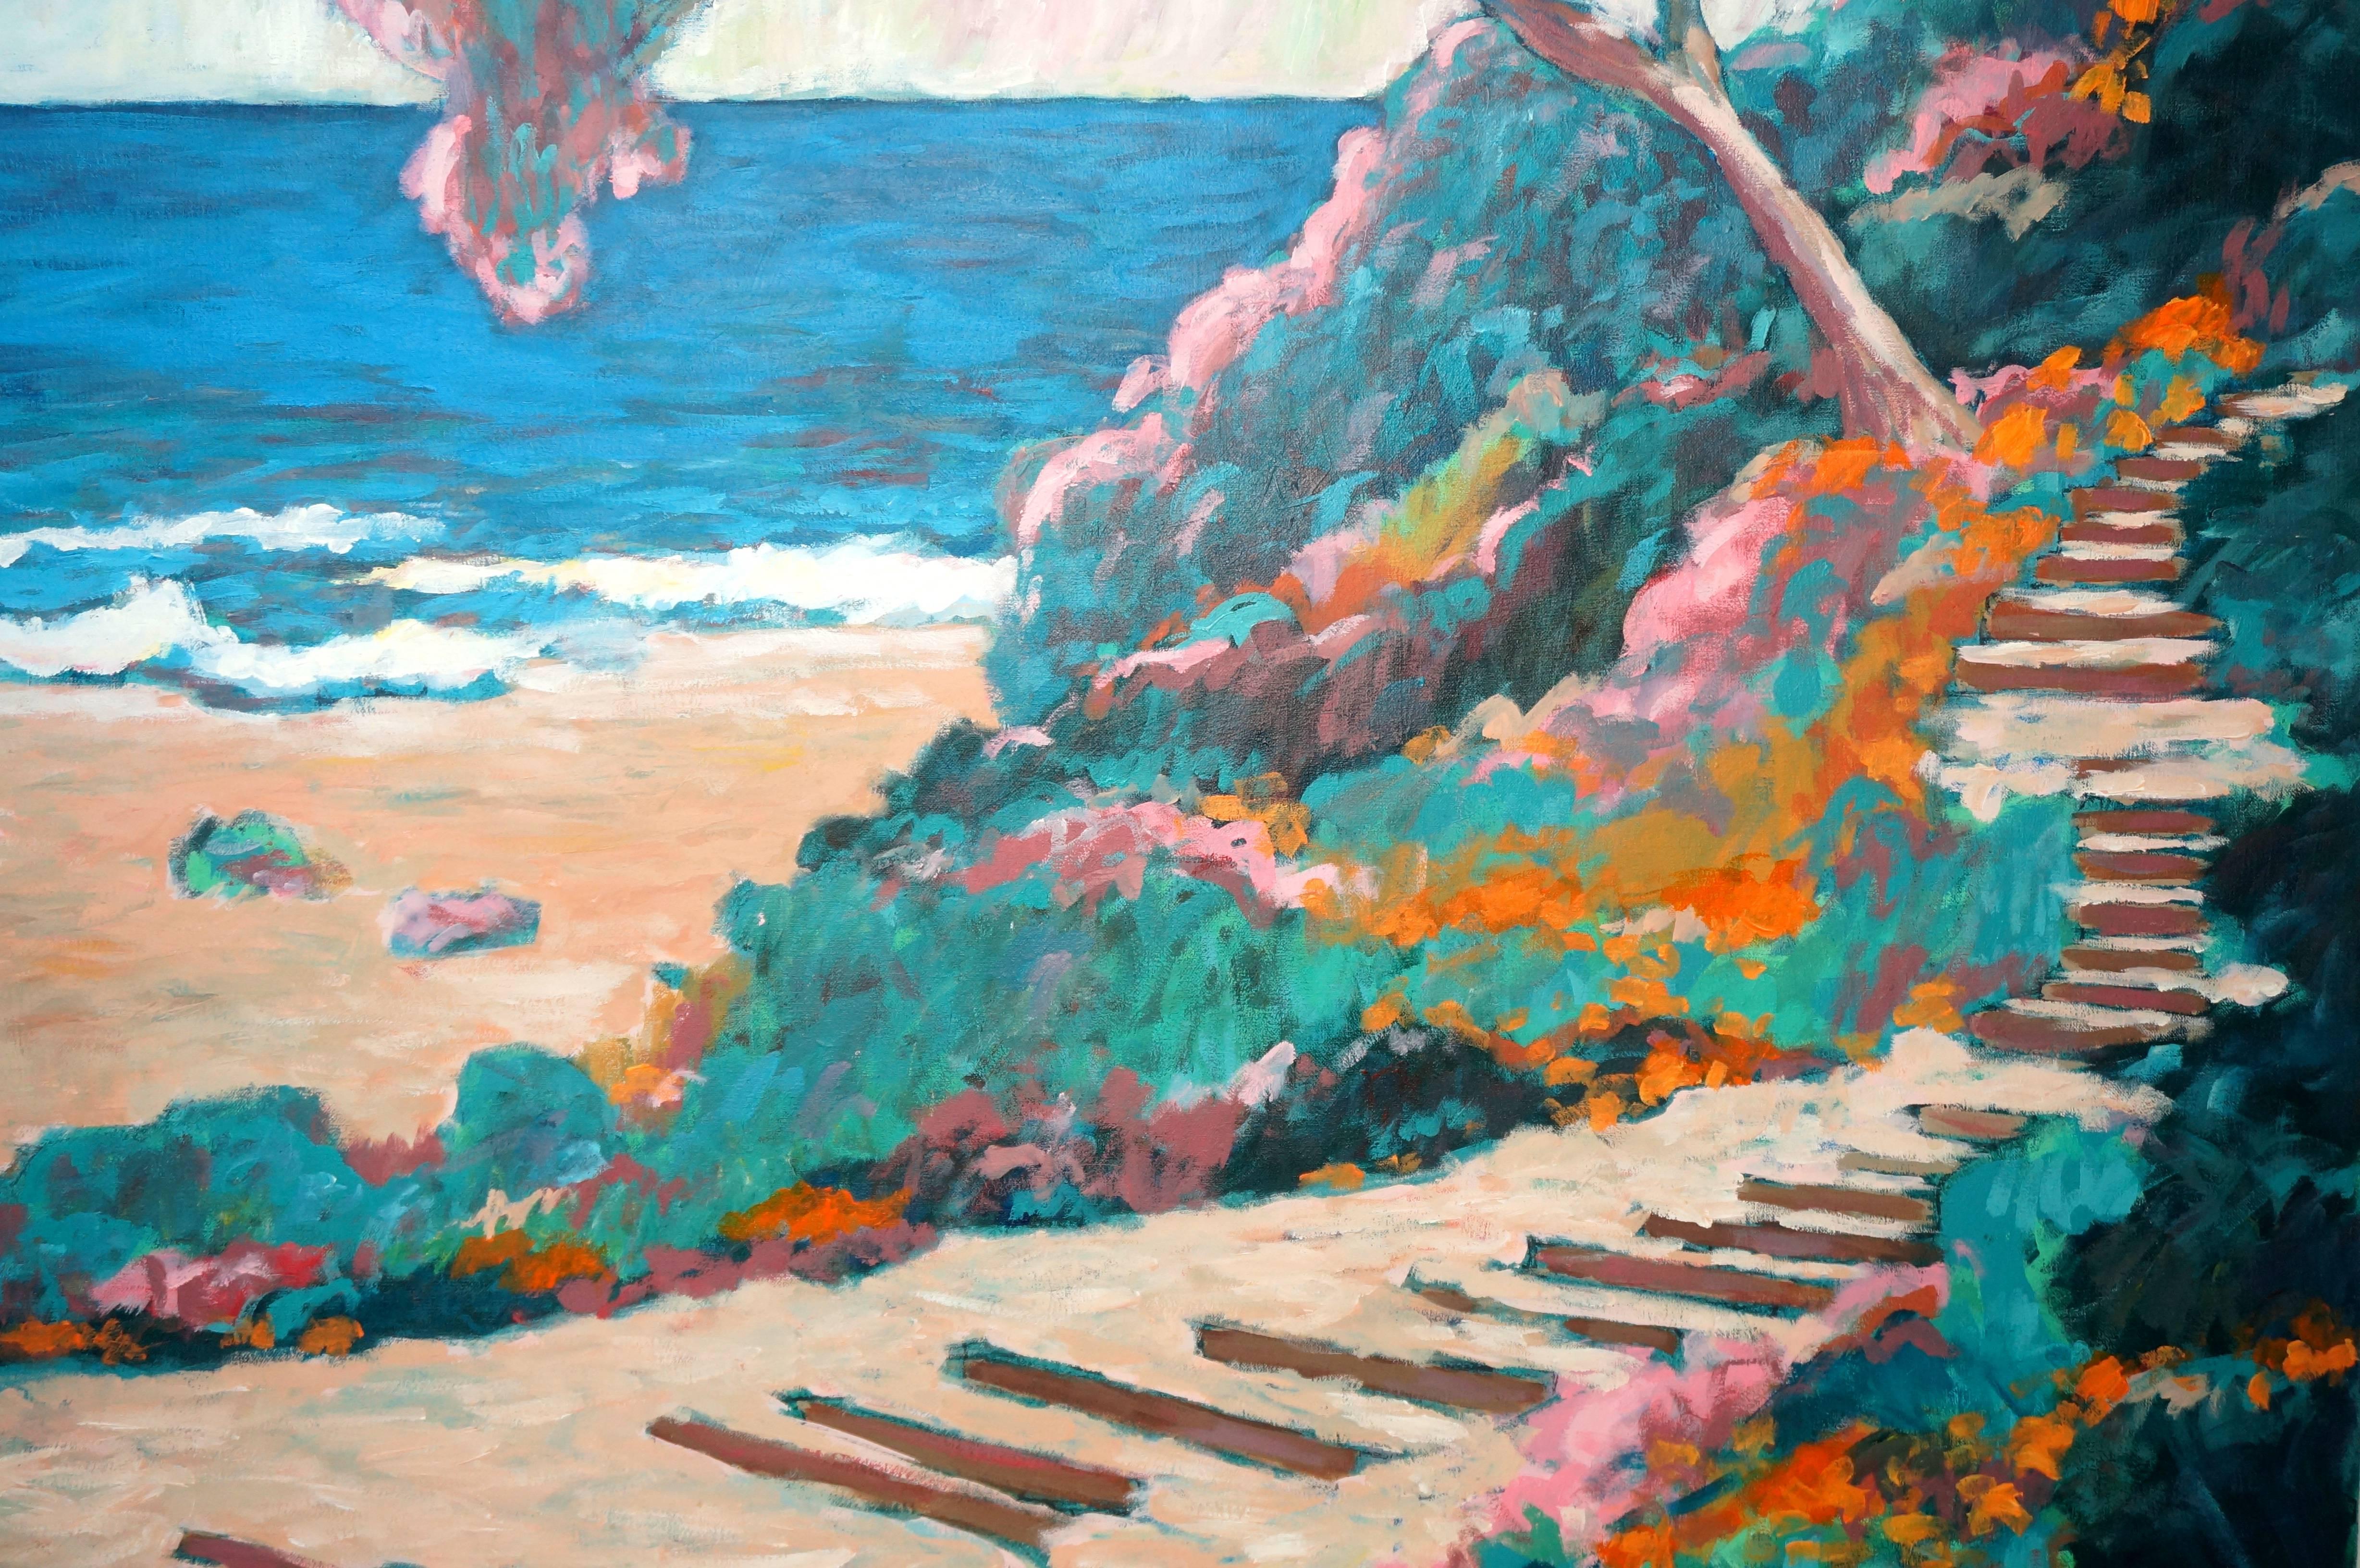 This set of two large-scale painting are by the American painter Nathan Solano and were a private commission (1988). Solano is known for his paintings of the American west and here he has captured the tropical and coastal landscape of the Hawaiian